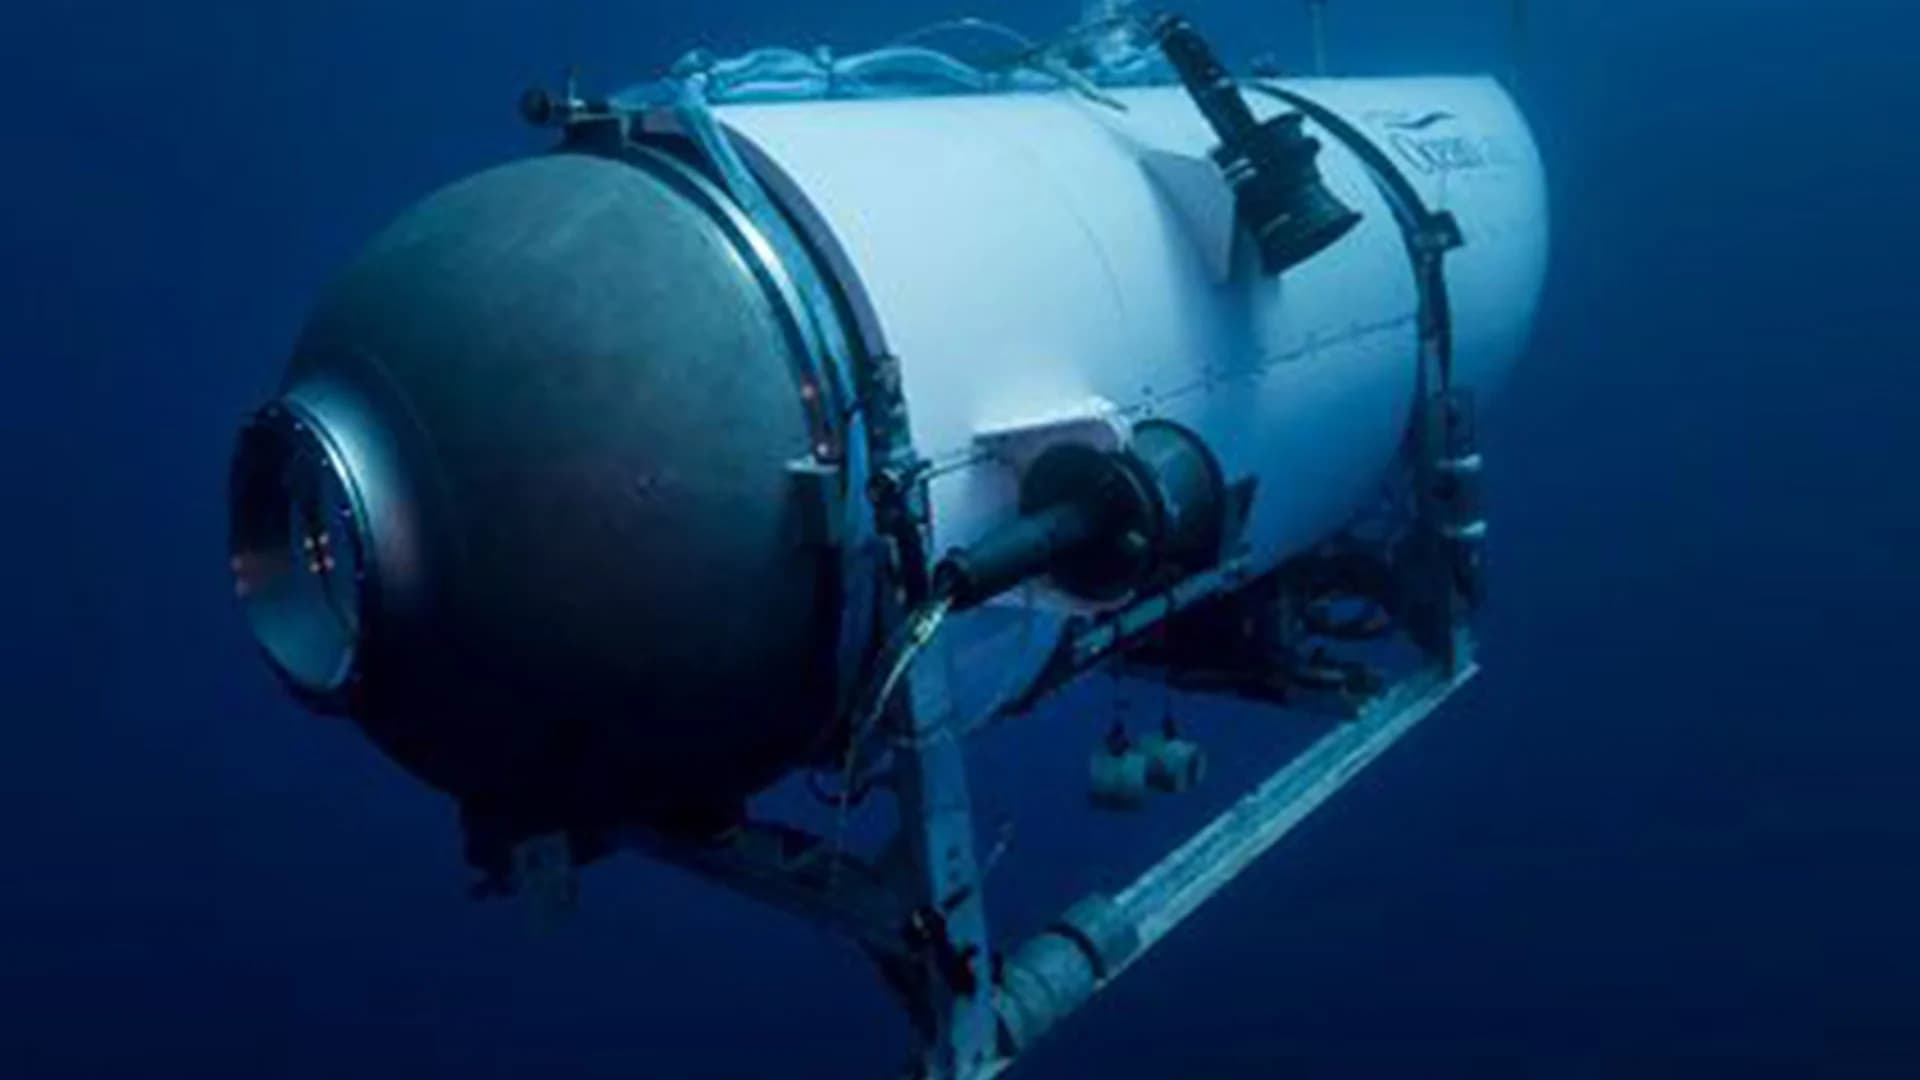 US Coast Guard says 'presumed human remains' found in wreckage of Titan submersible